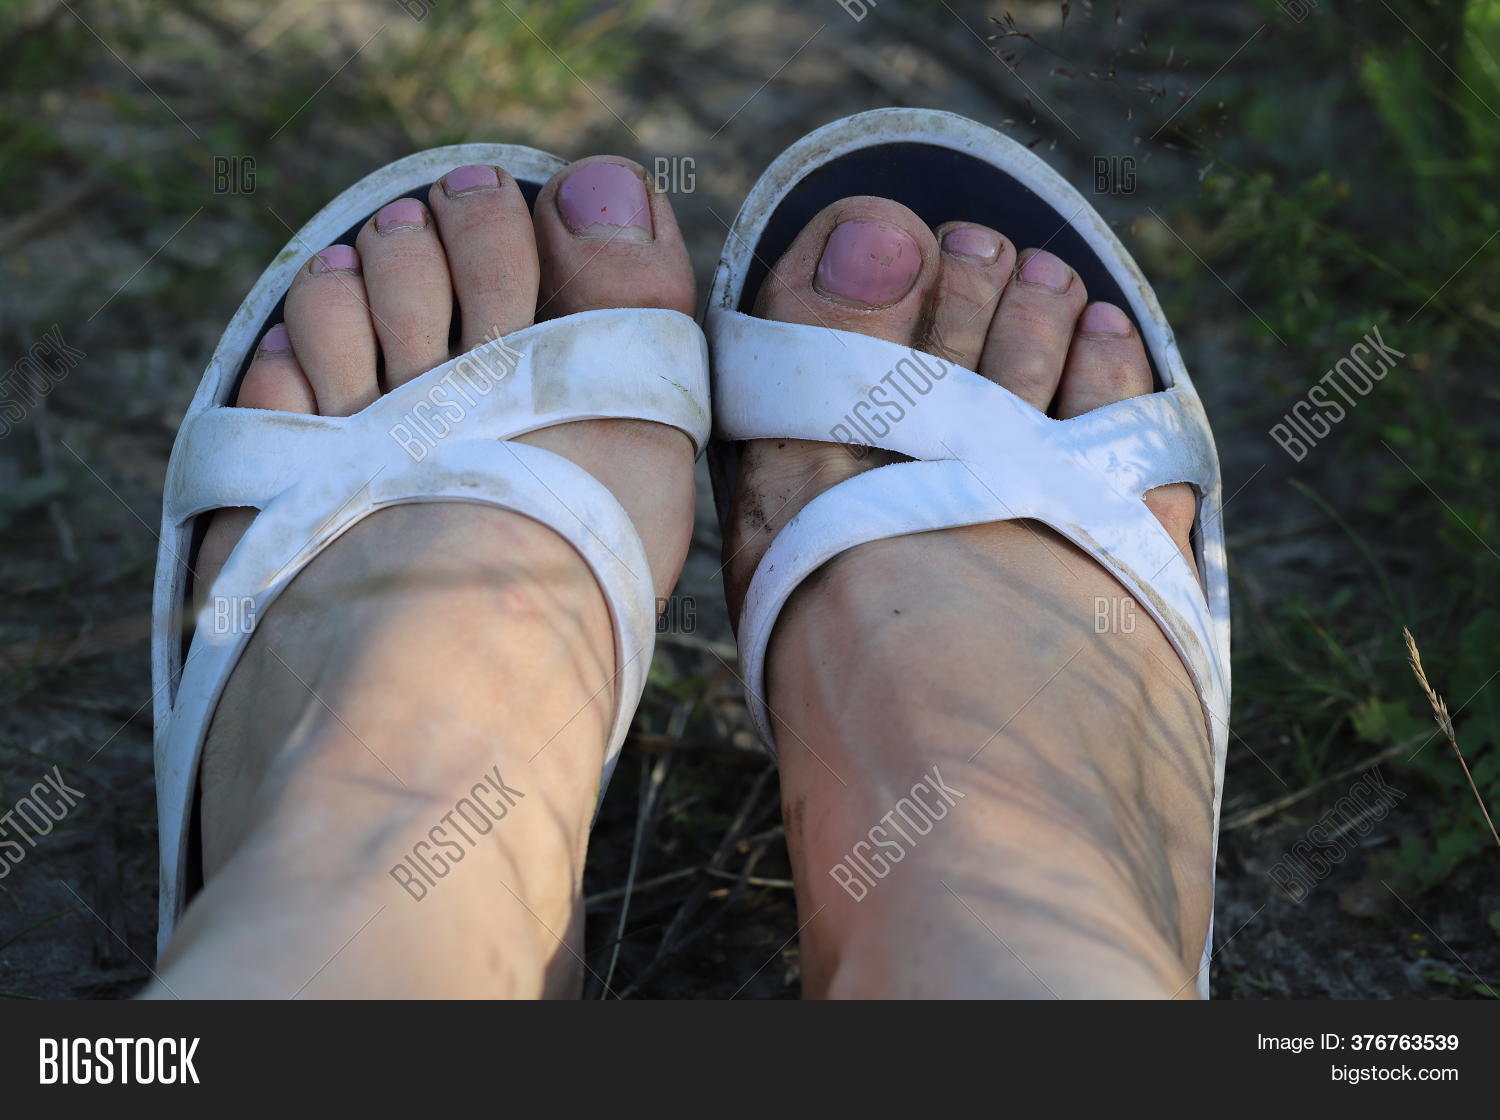 angie mccormack recommends dirty white flip flops pic